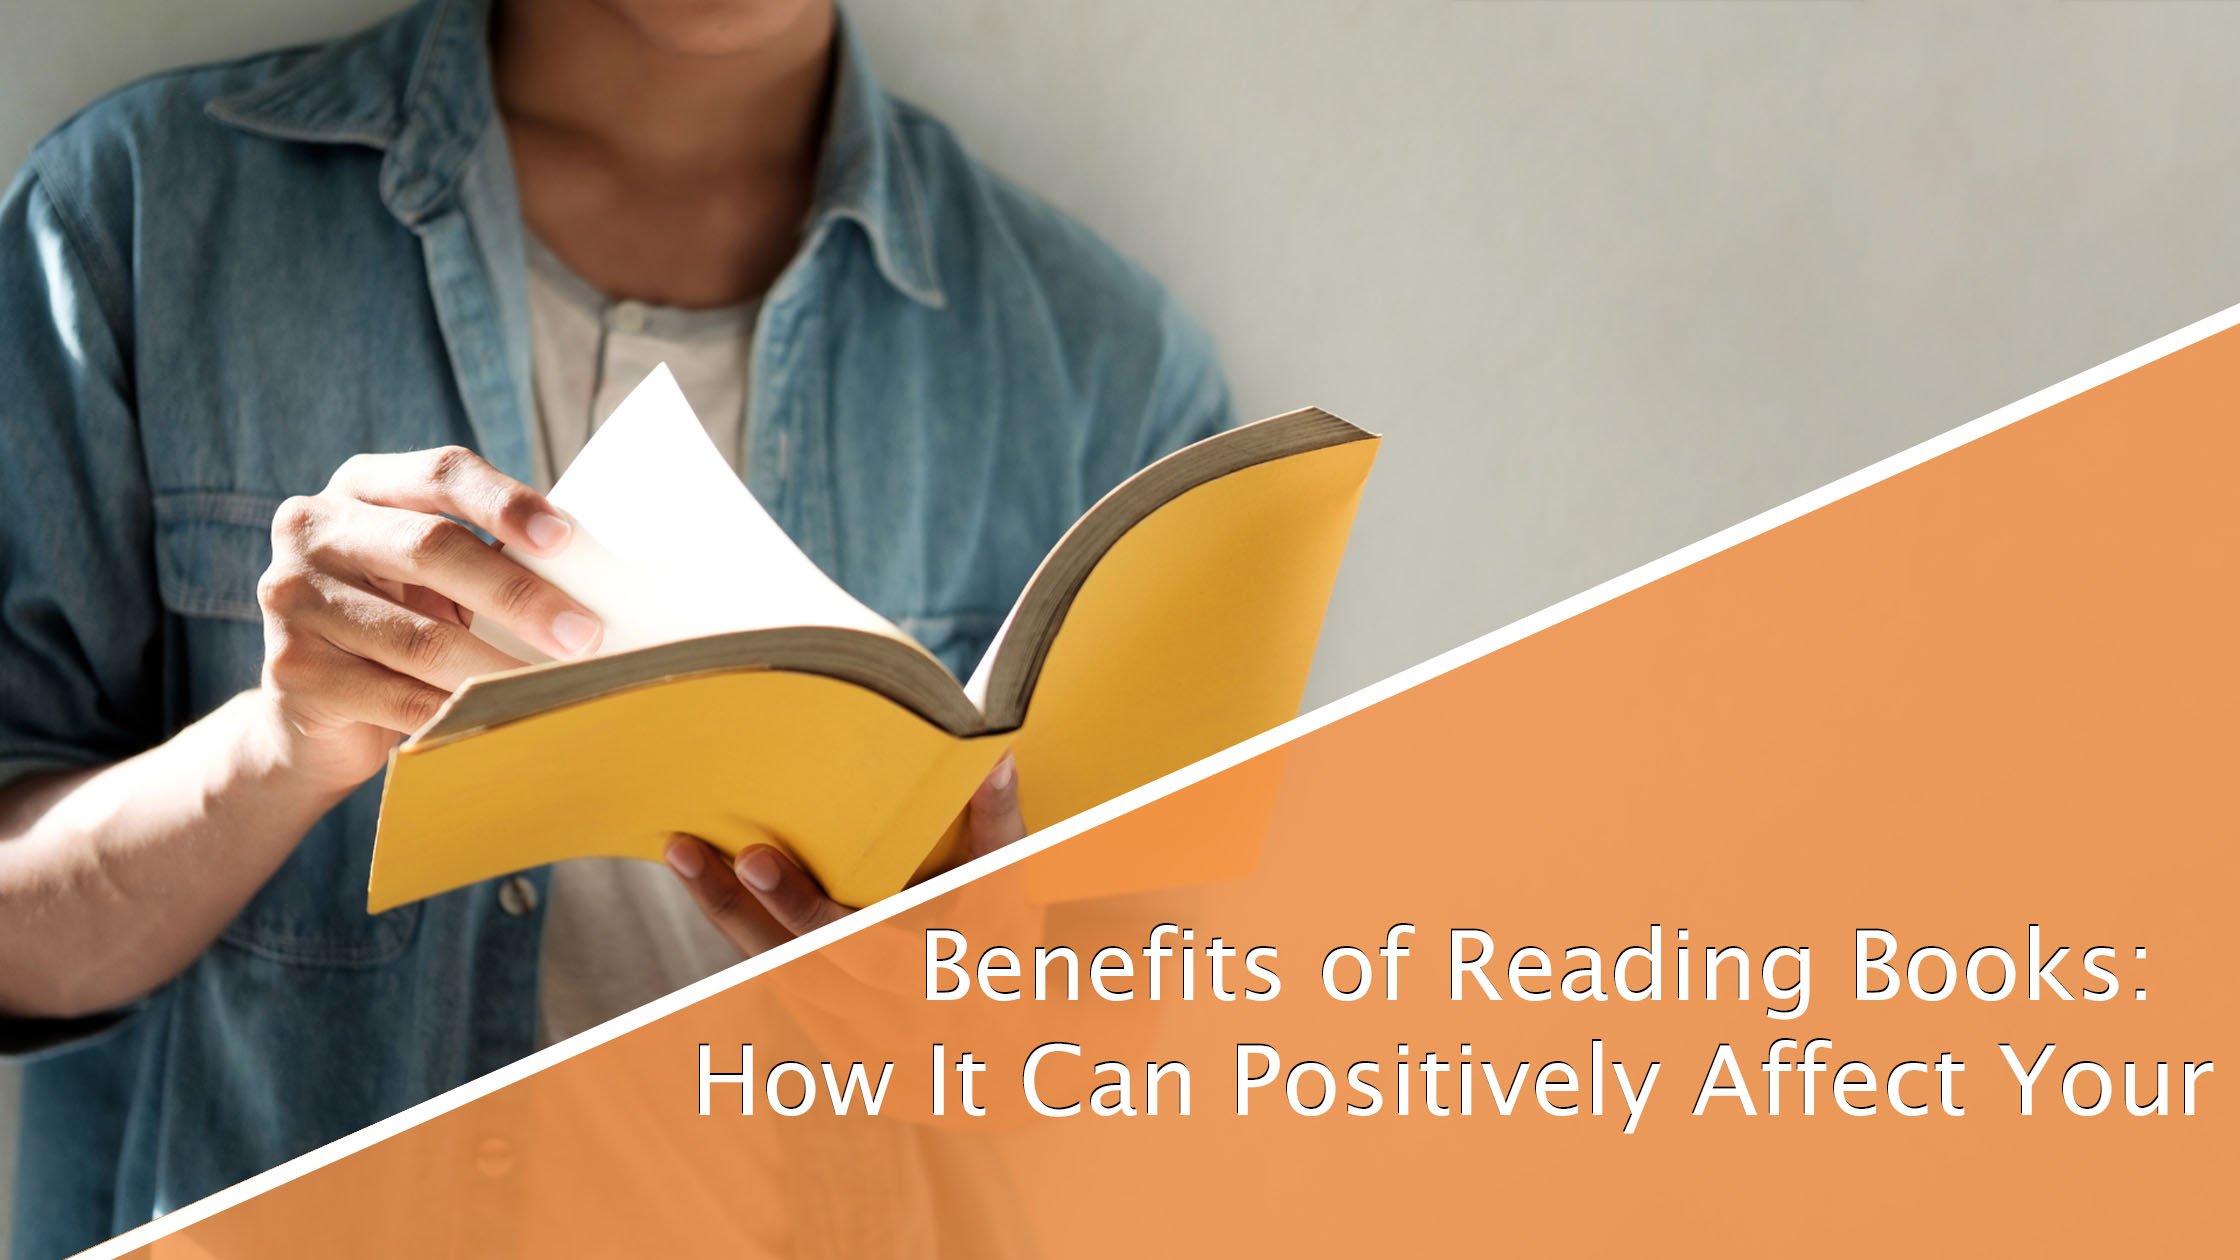 Benefits of Reading Books: How It Can Positively Affect Your Life